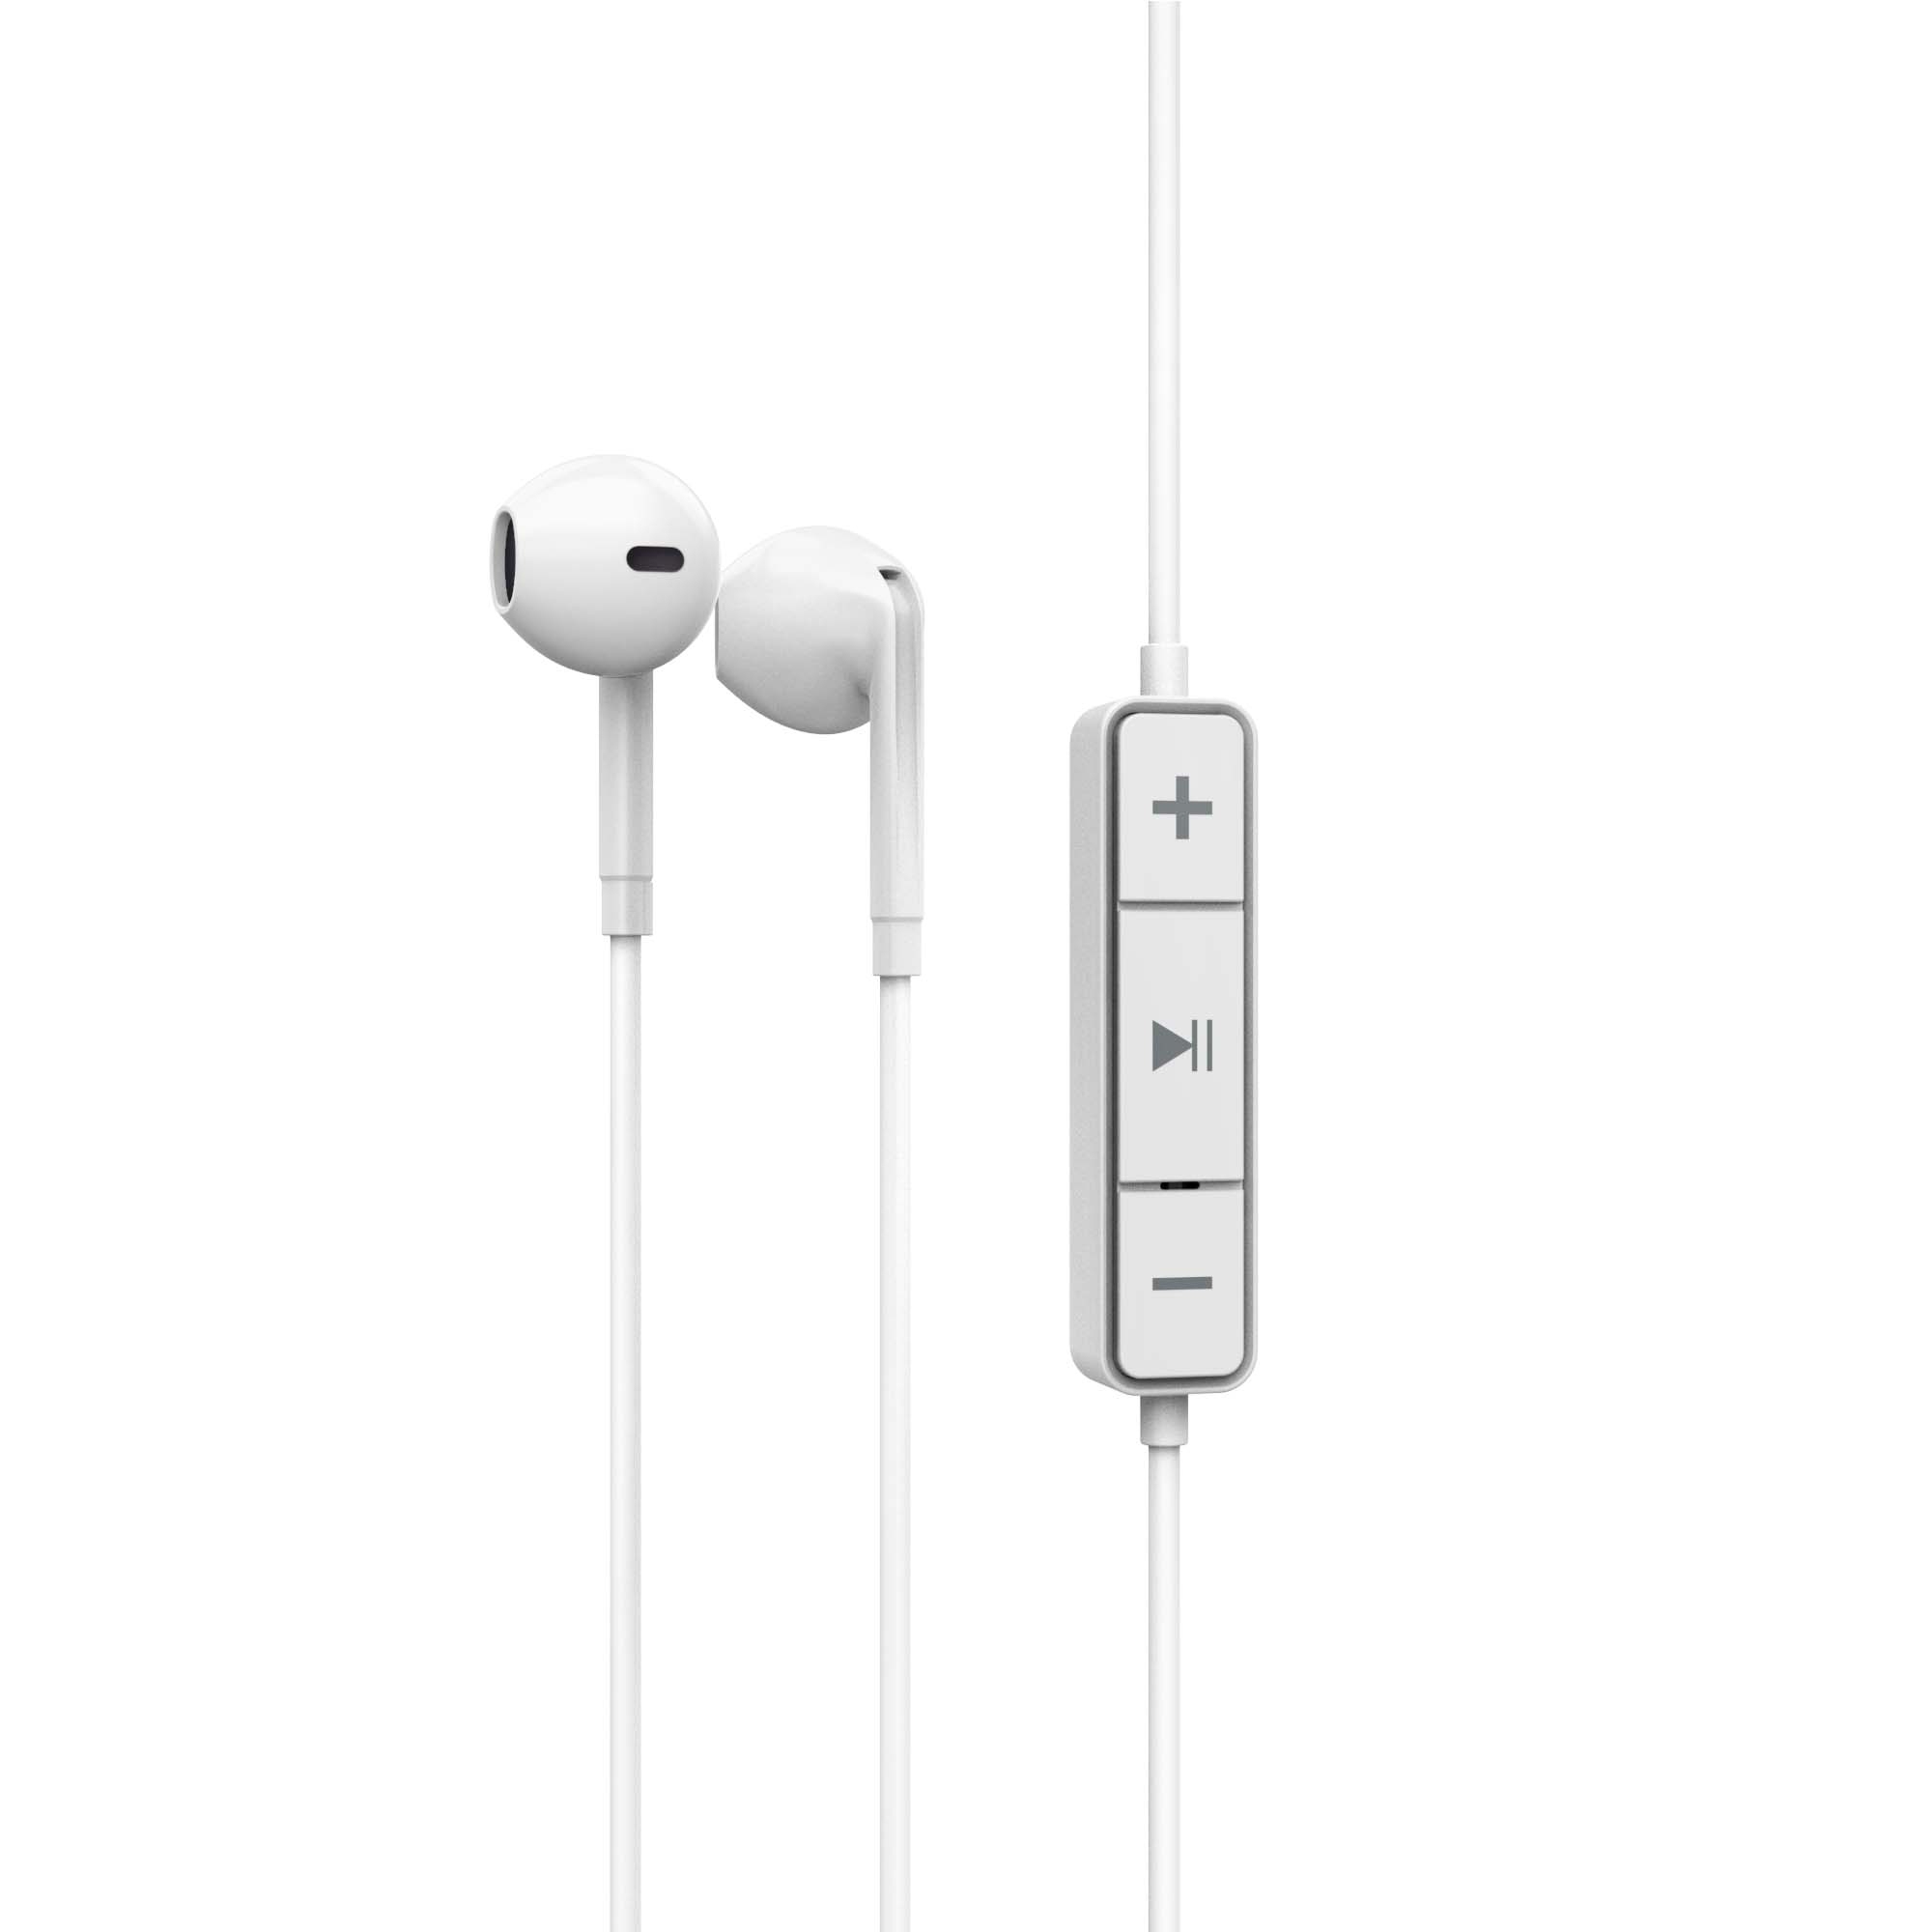 Bluetooth earphones with Crystal Clear Sound technology